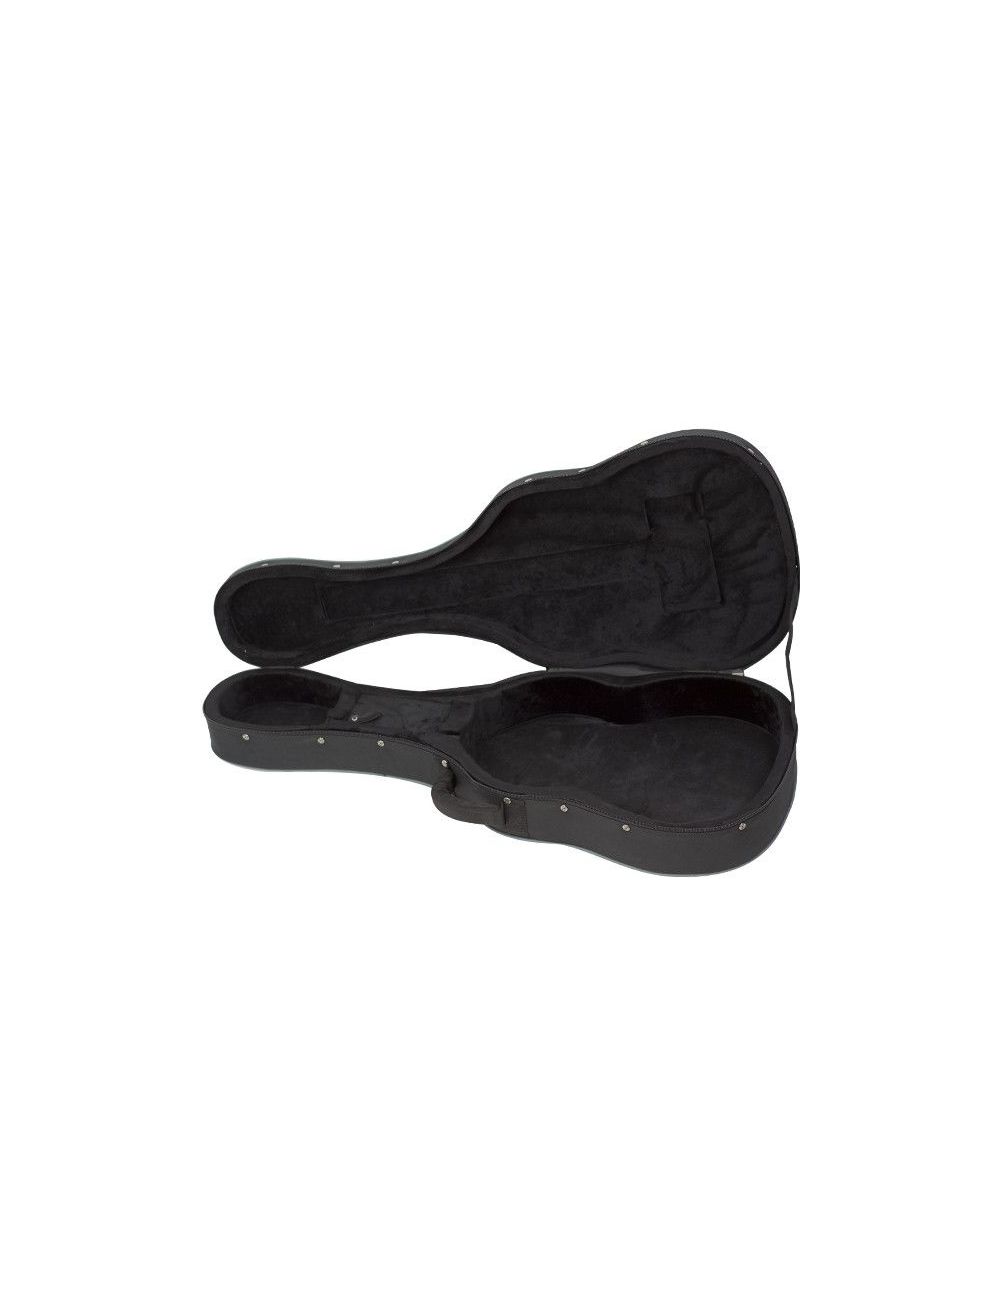 Ortola RB616 case for narrow body classical guitars RB616 Special sizes